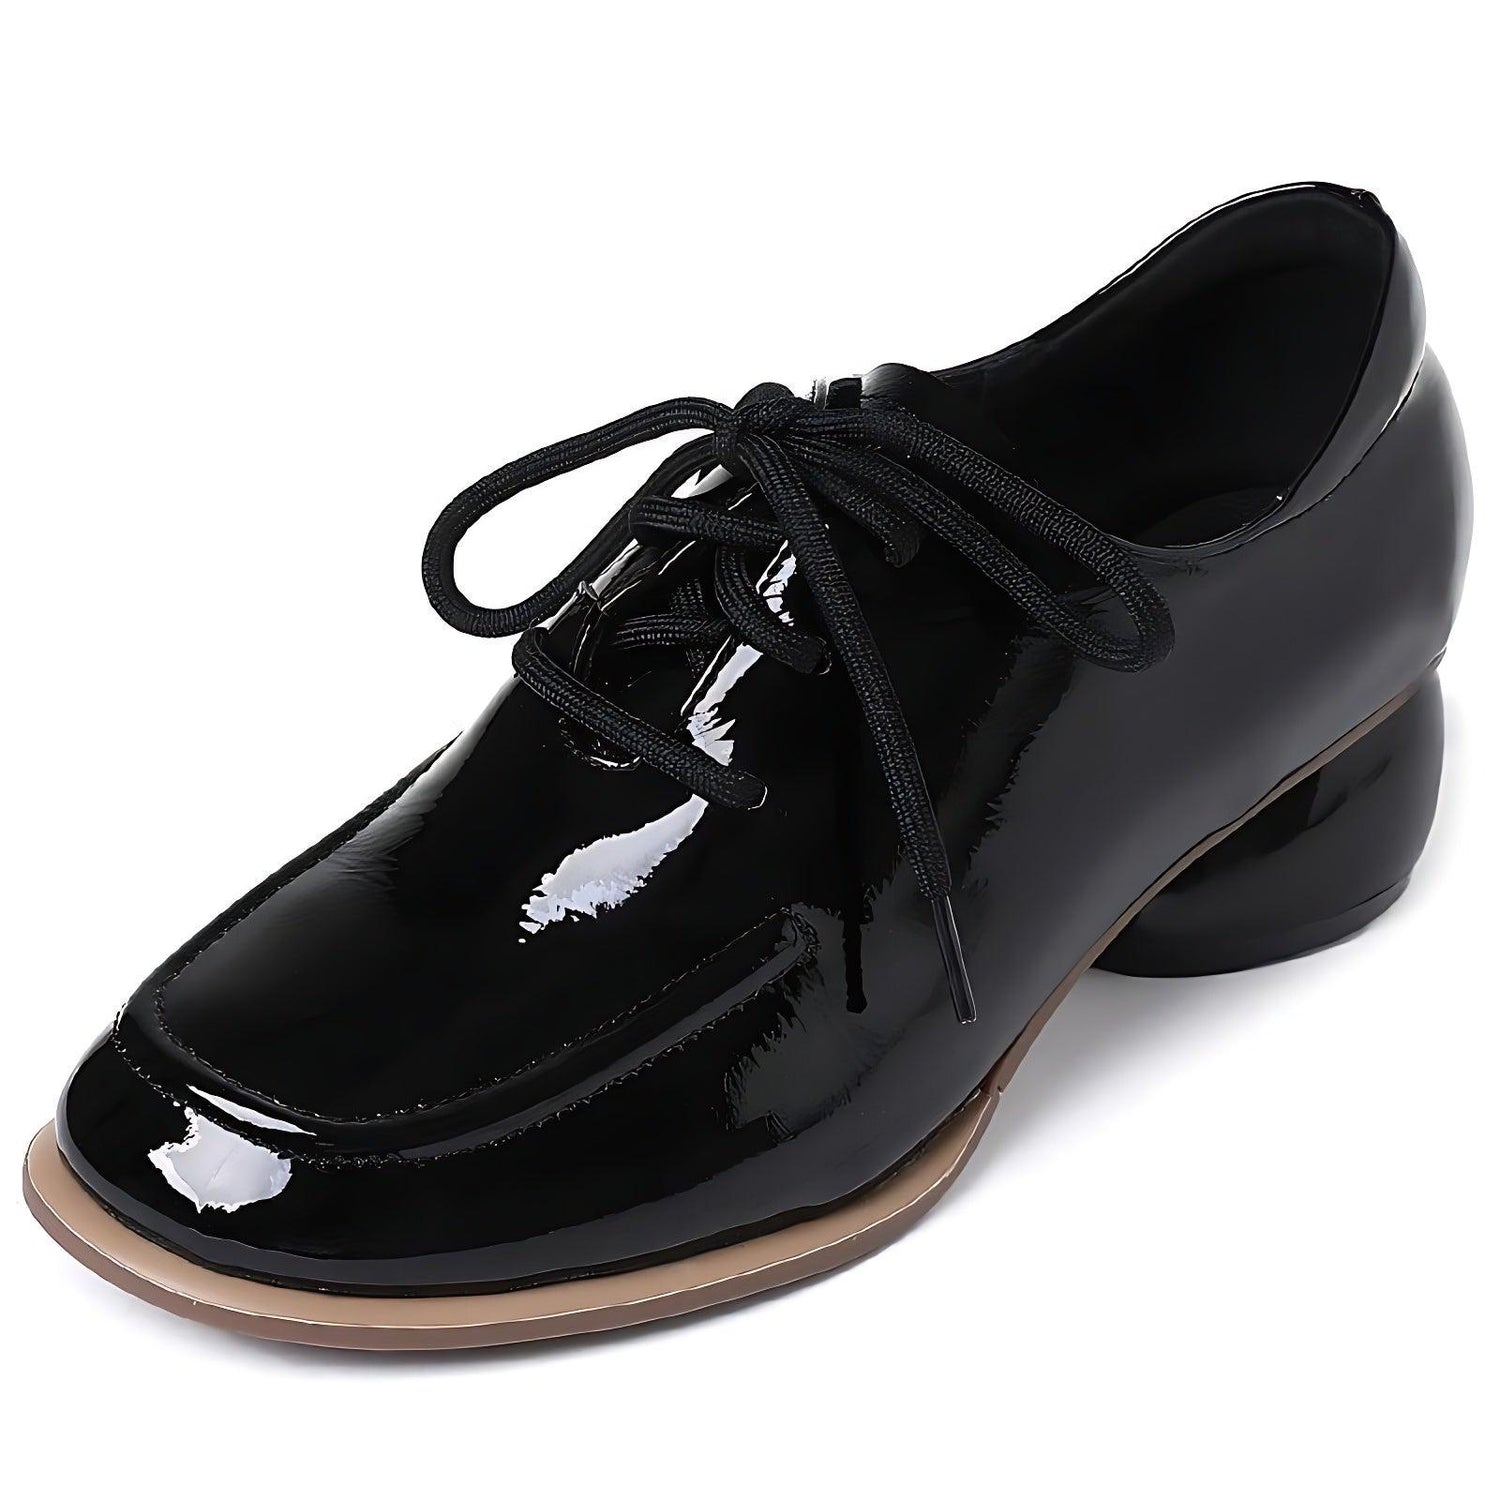 Classic Black Leather Shoes for Women - Touchy Style .